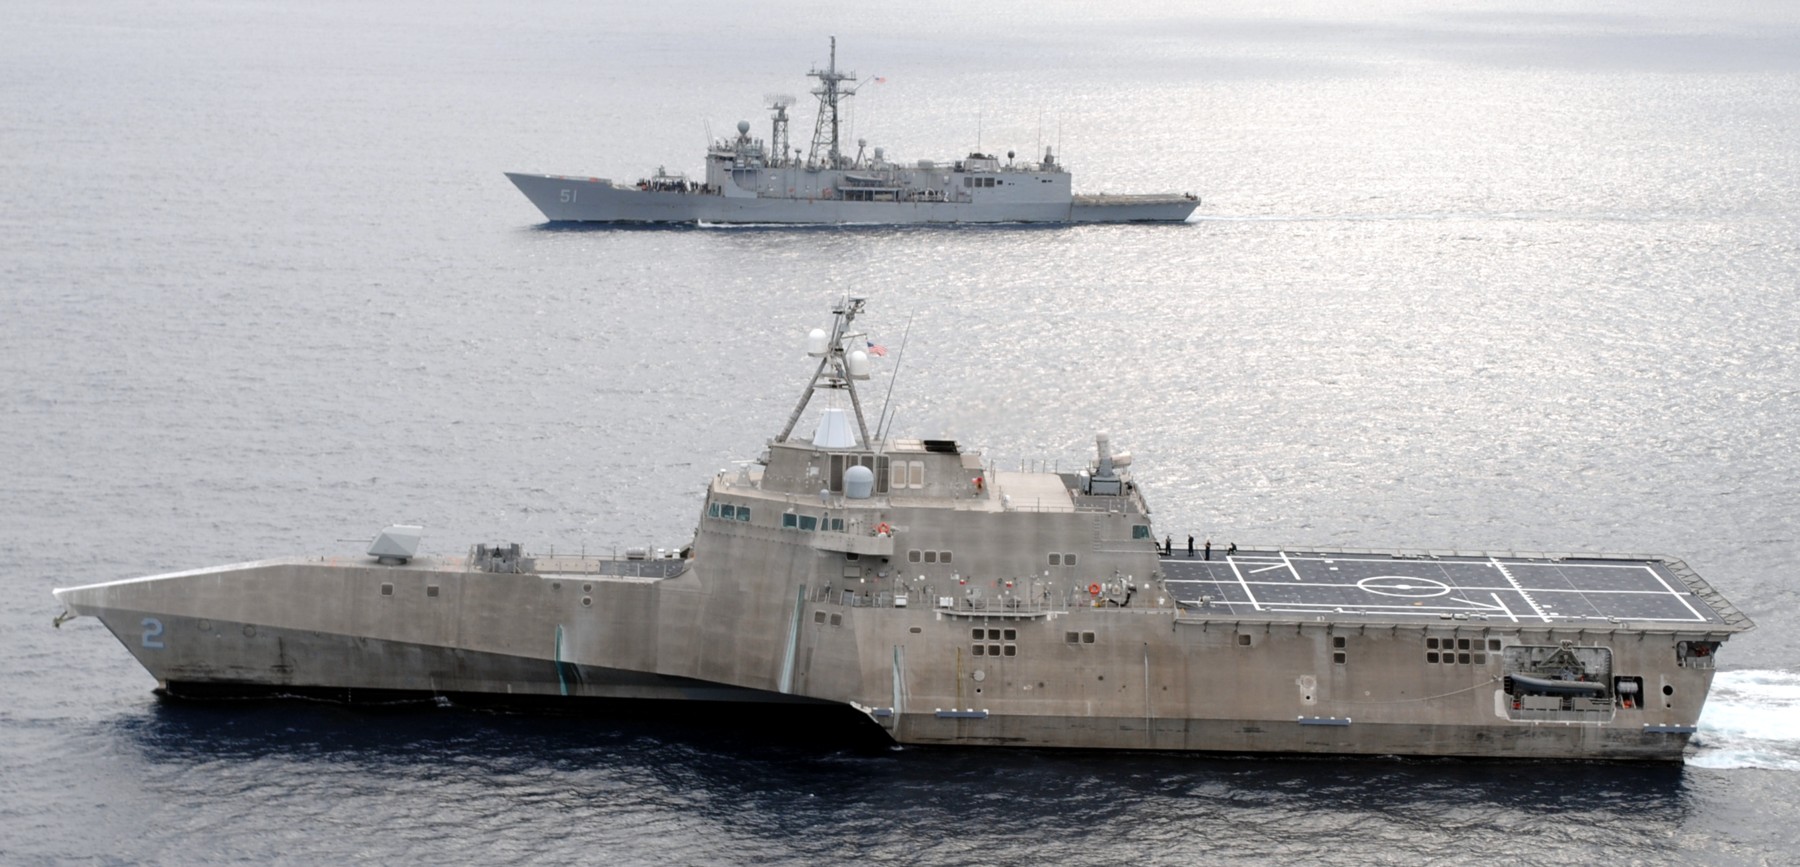 lcs-2 uss independence littoral combat ship us navy class 02a